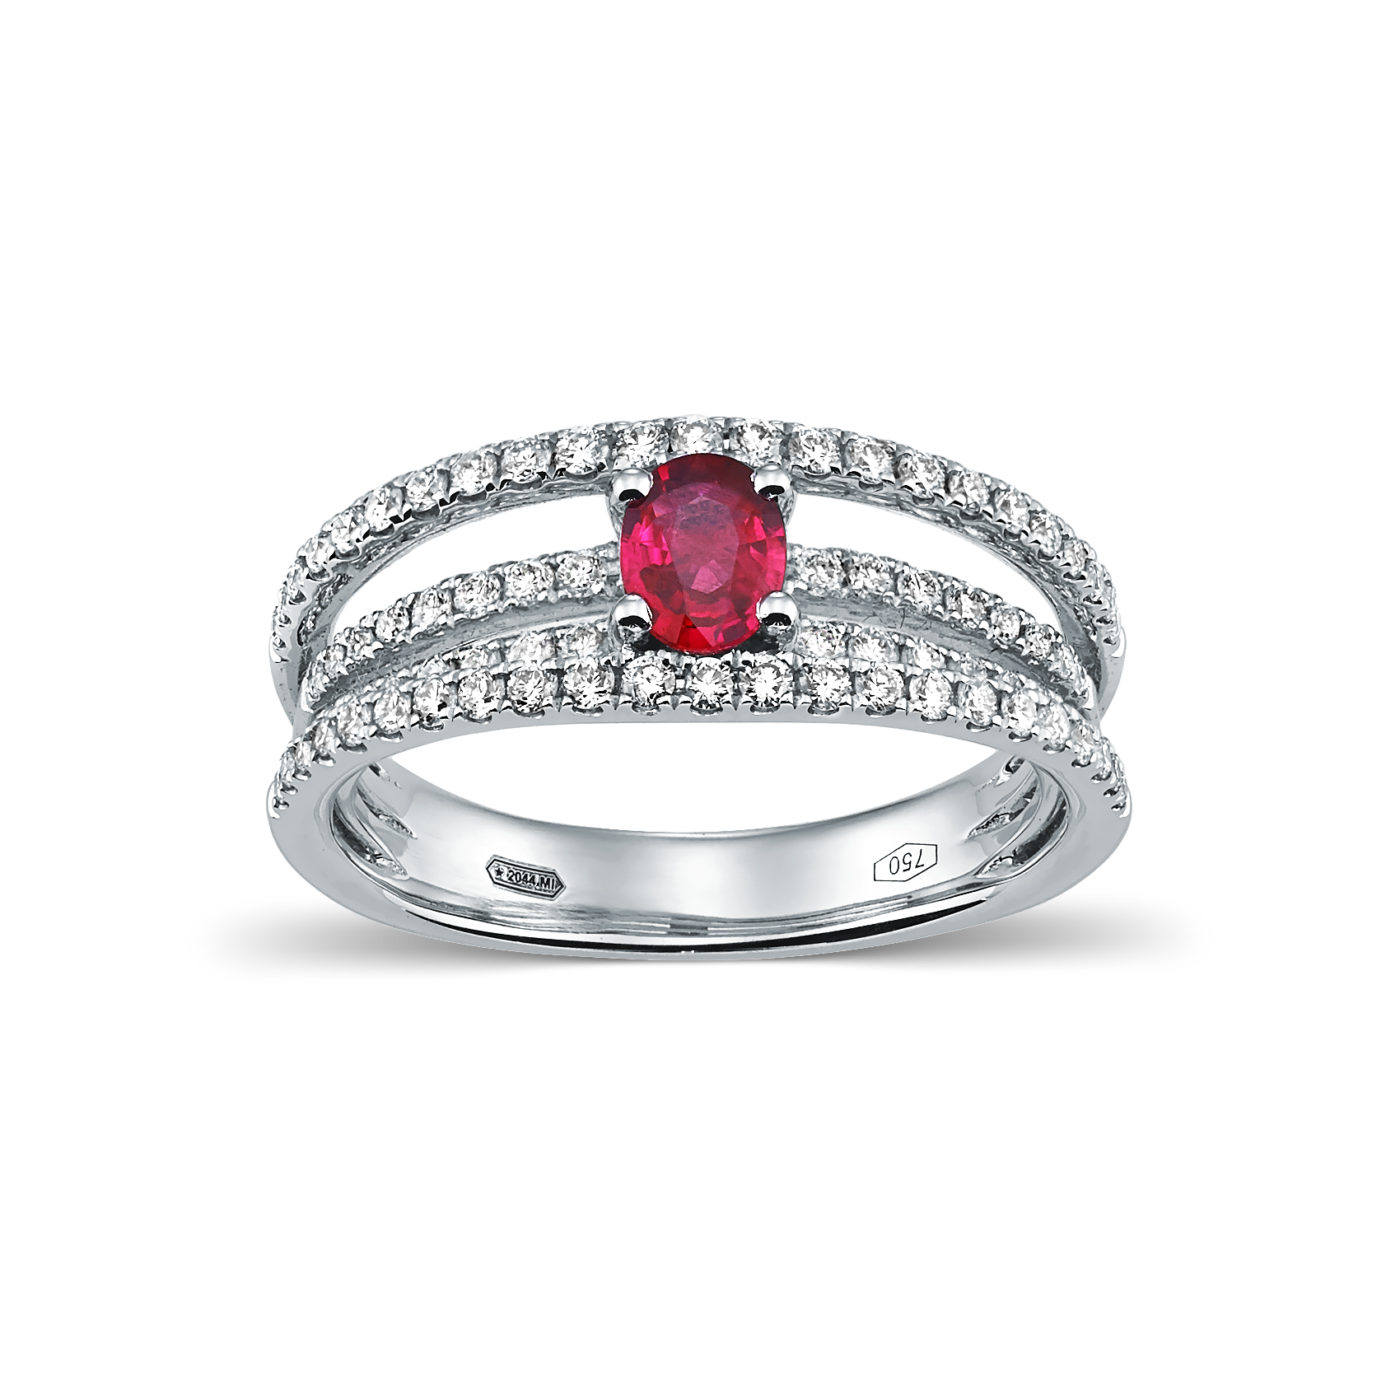 Devous Ruby Ring with Diamonds